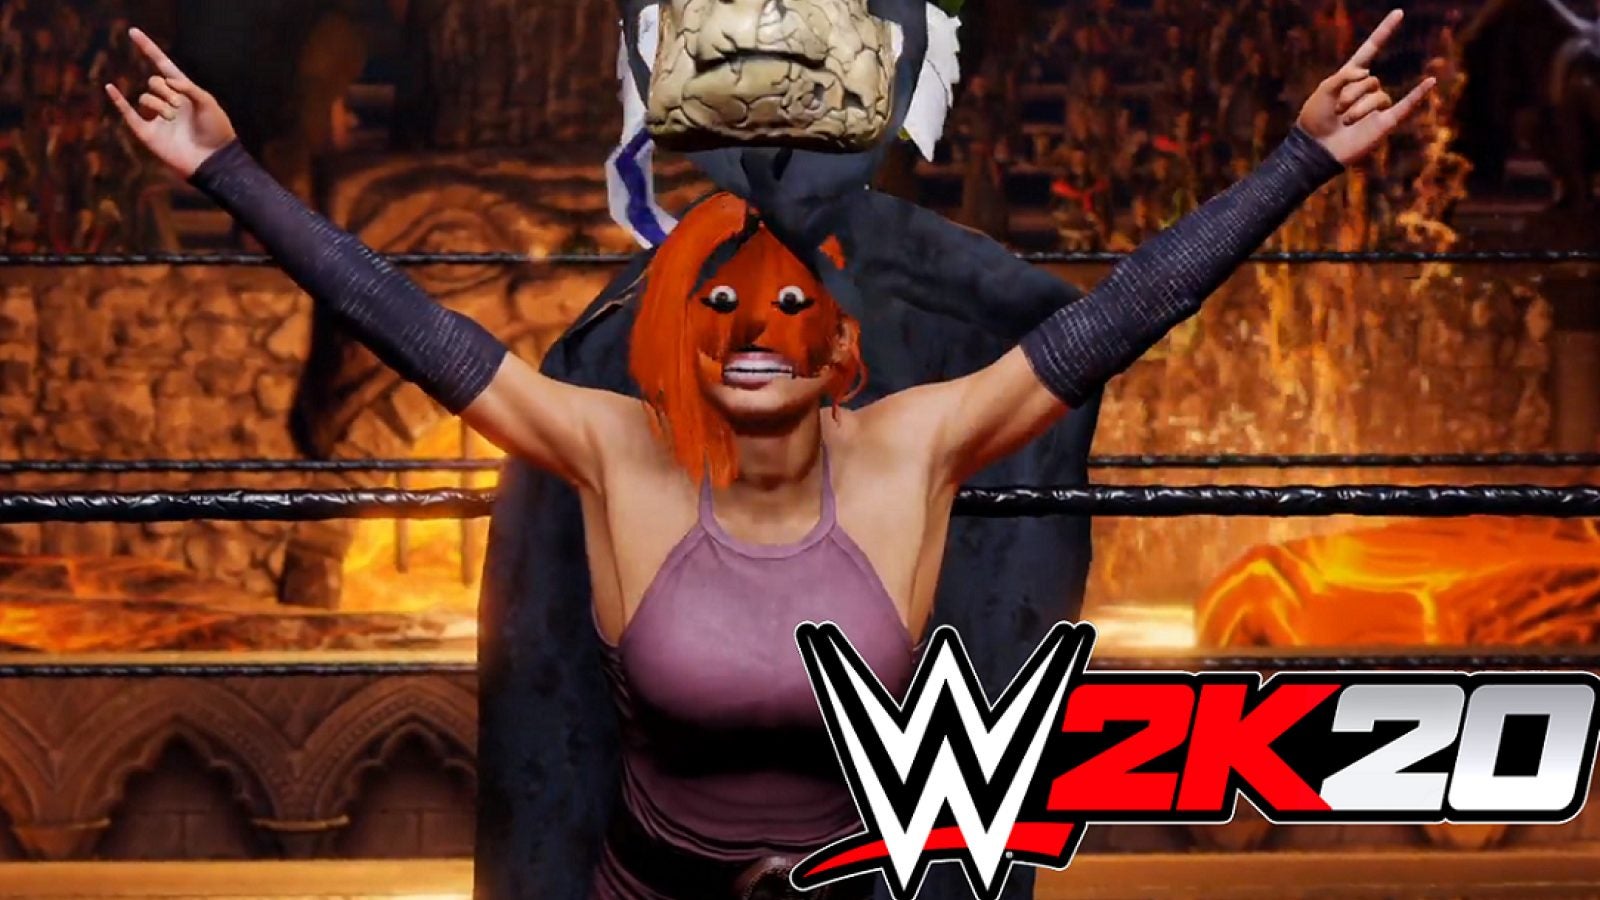 Image for Sony issuing refunds for faulty WWE 2K20